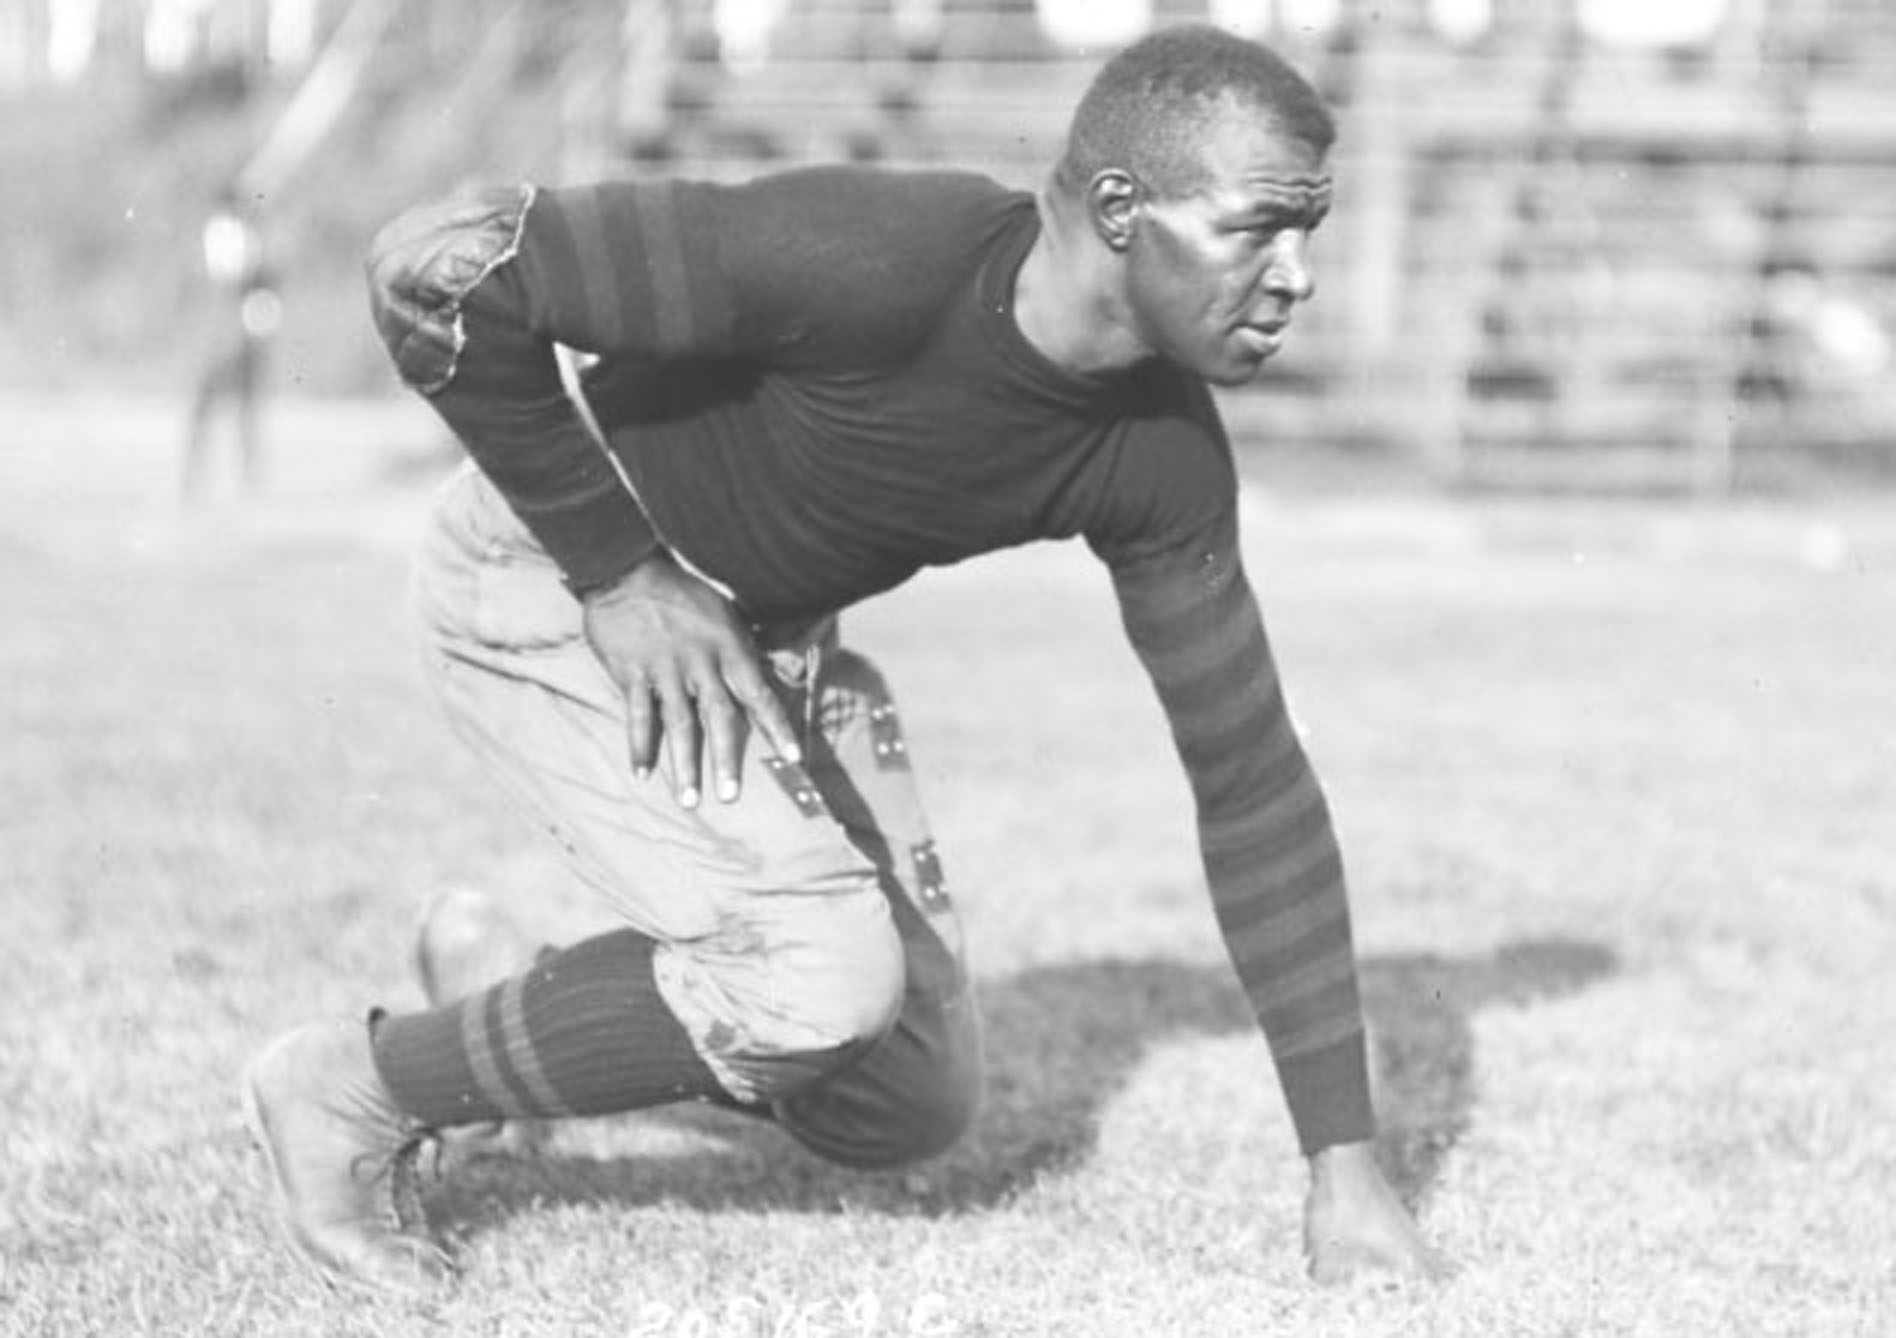 FLASHBACK: Cal Repeats as National Champion in 1921